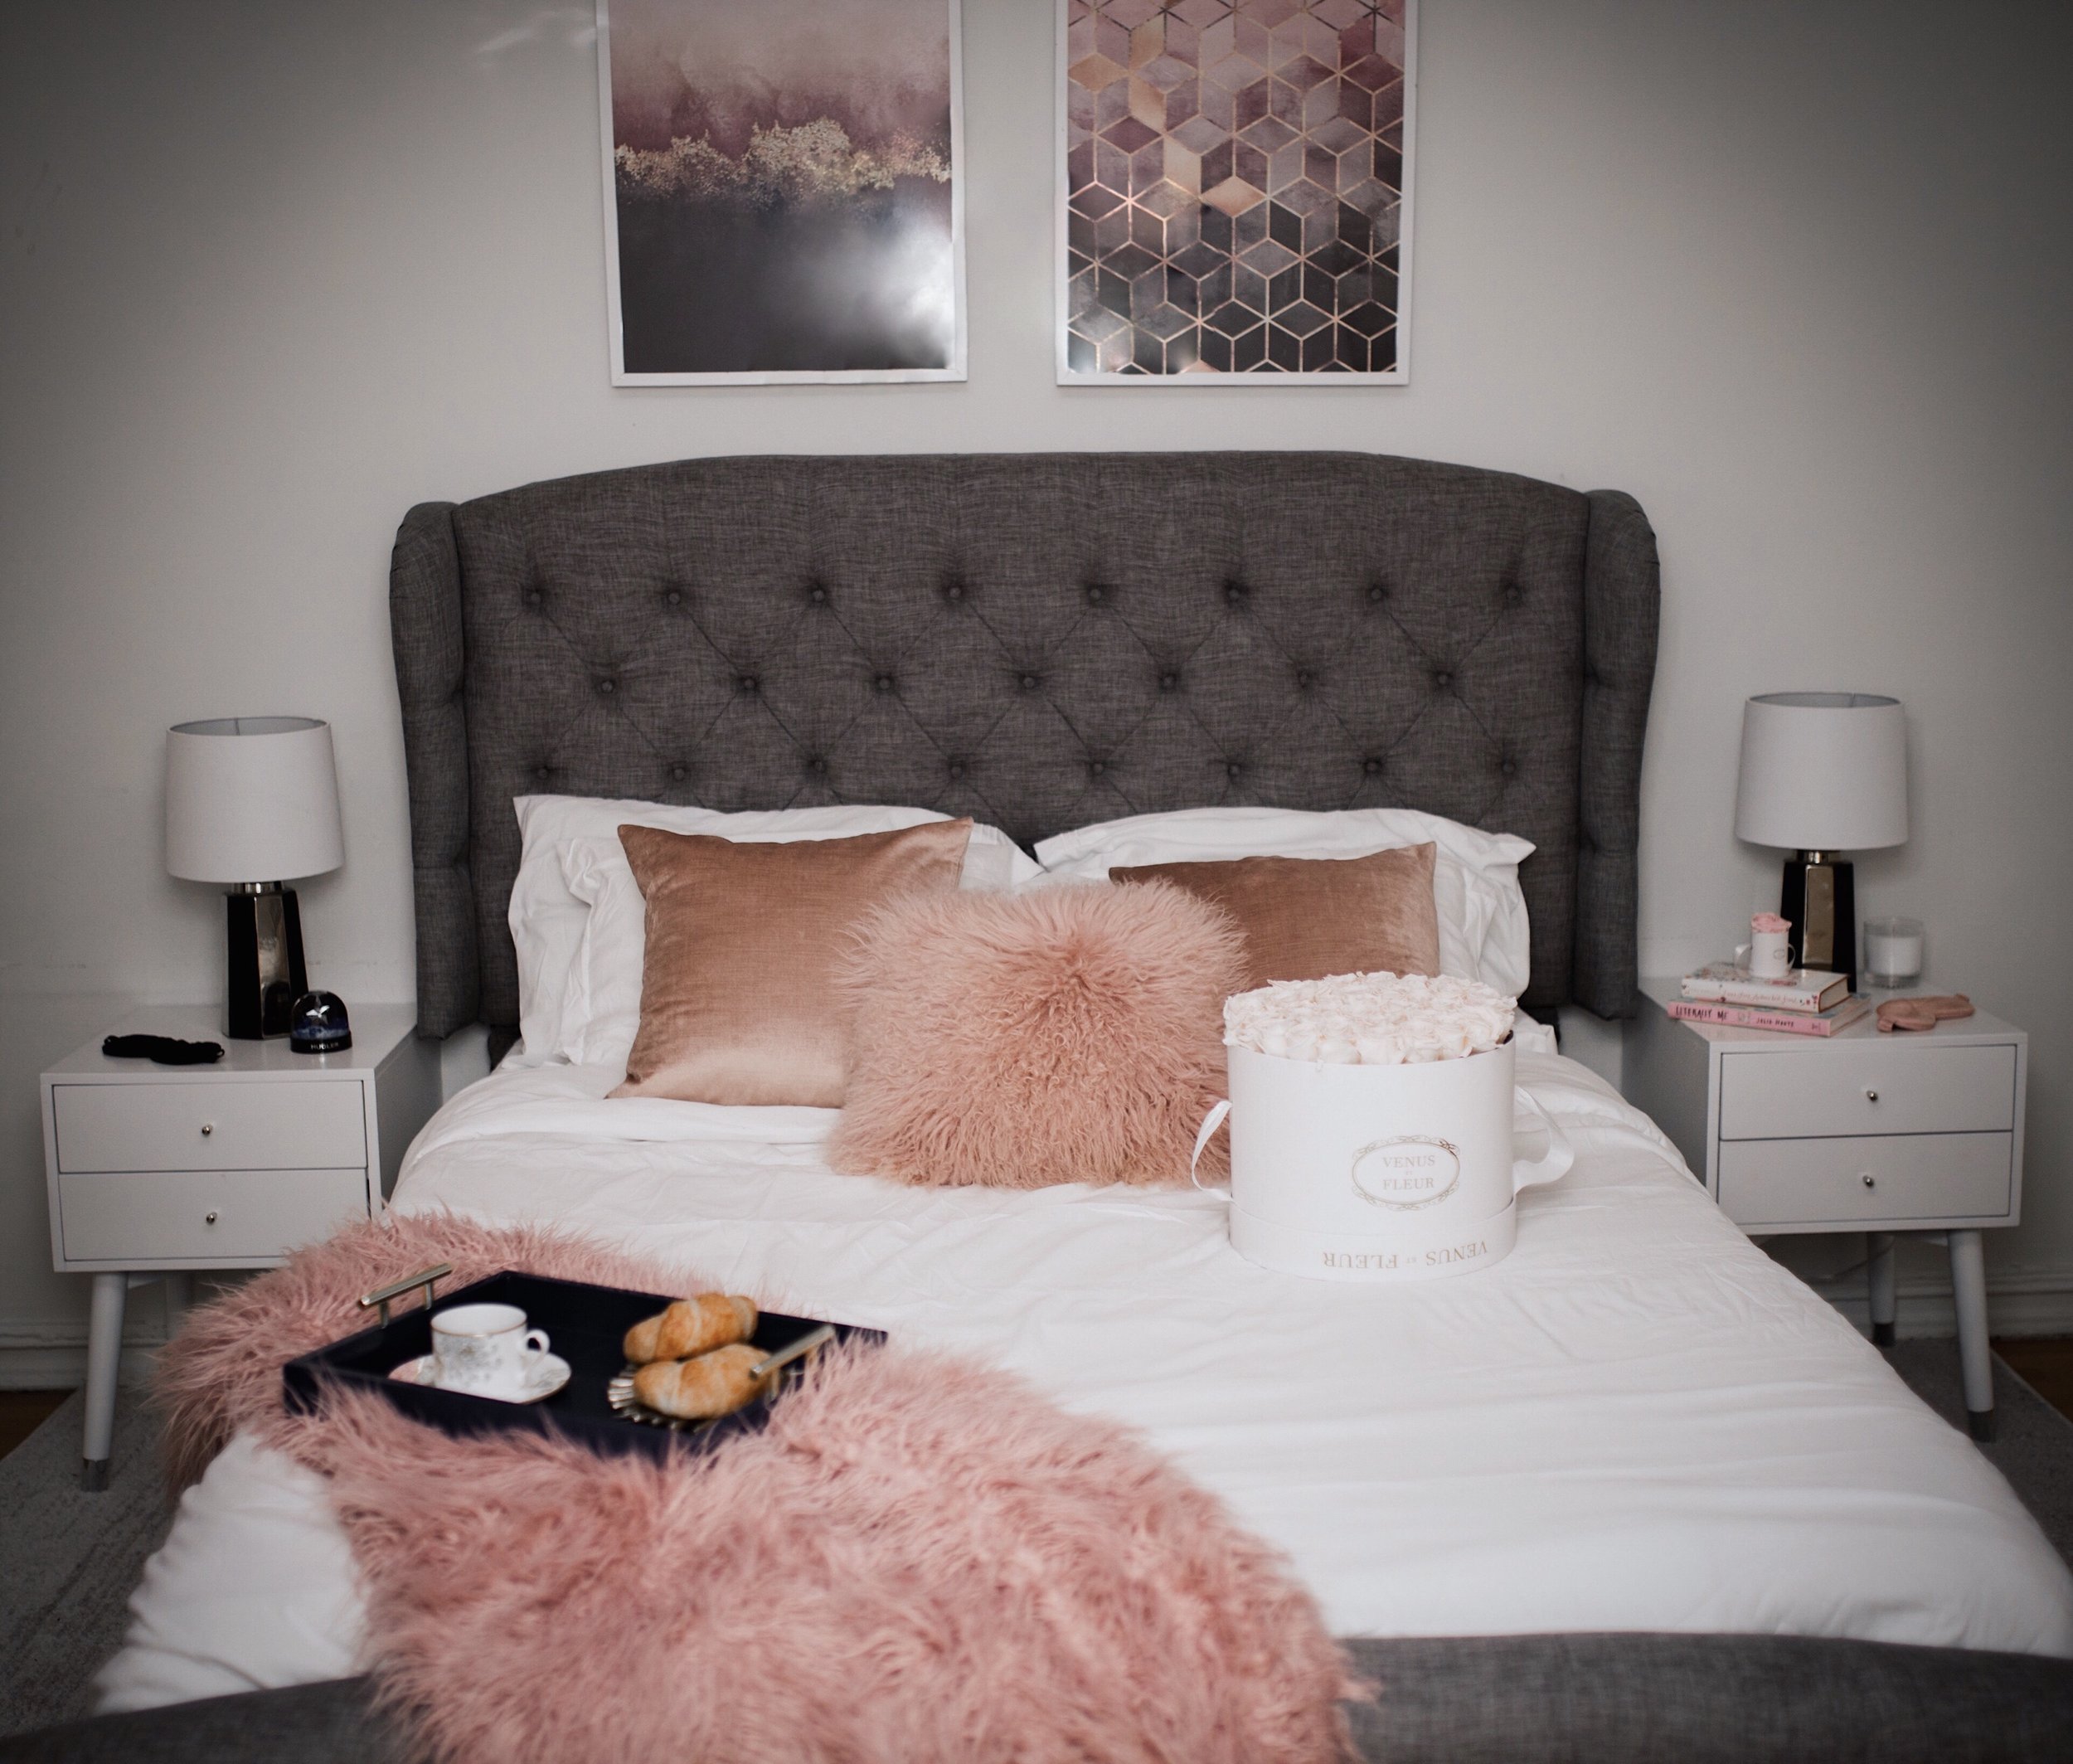 My Bedroom Reveal Joss & Main Esther Santer Fashion Blog NYC Street Style Blogger White Duvet Cover Pink Furry Throw Pillows Blanket Blush Gold Lamps Grey Bed Headboard Shopping Buy Beautiful Room Furniture White Nightstands Navy  Tray Art Breakfast.jpg